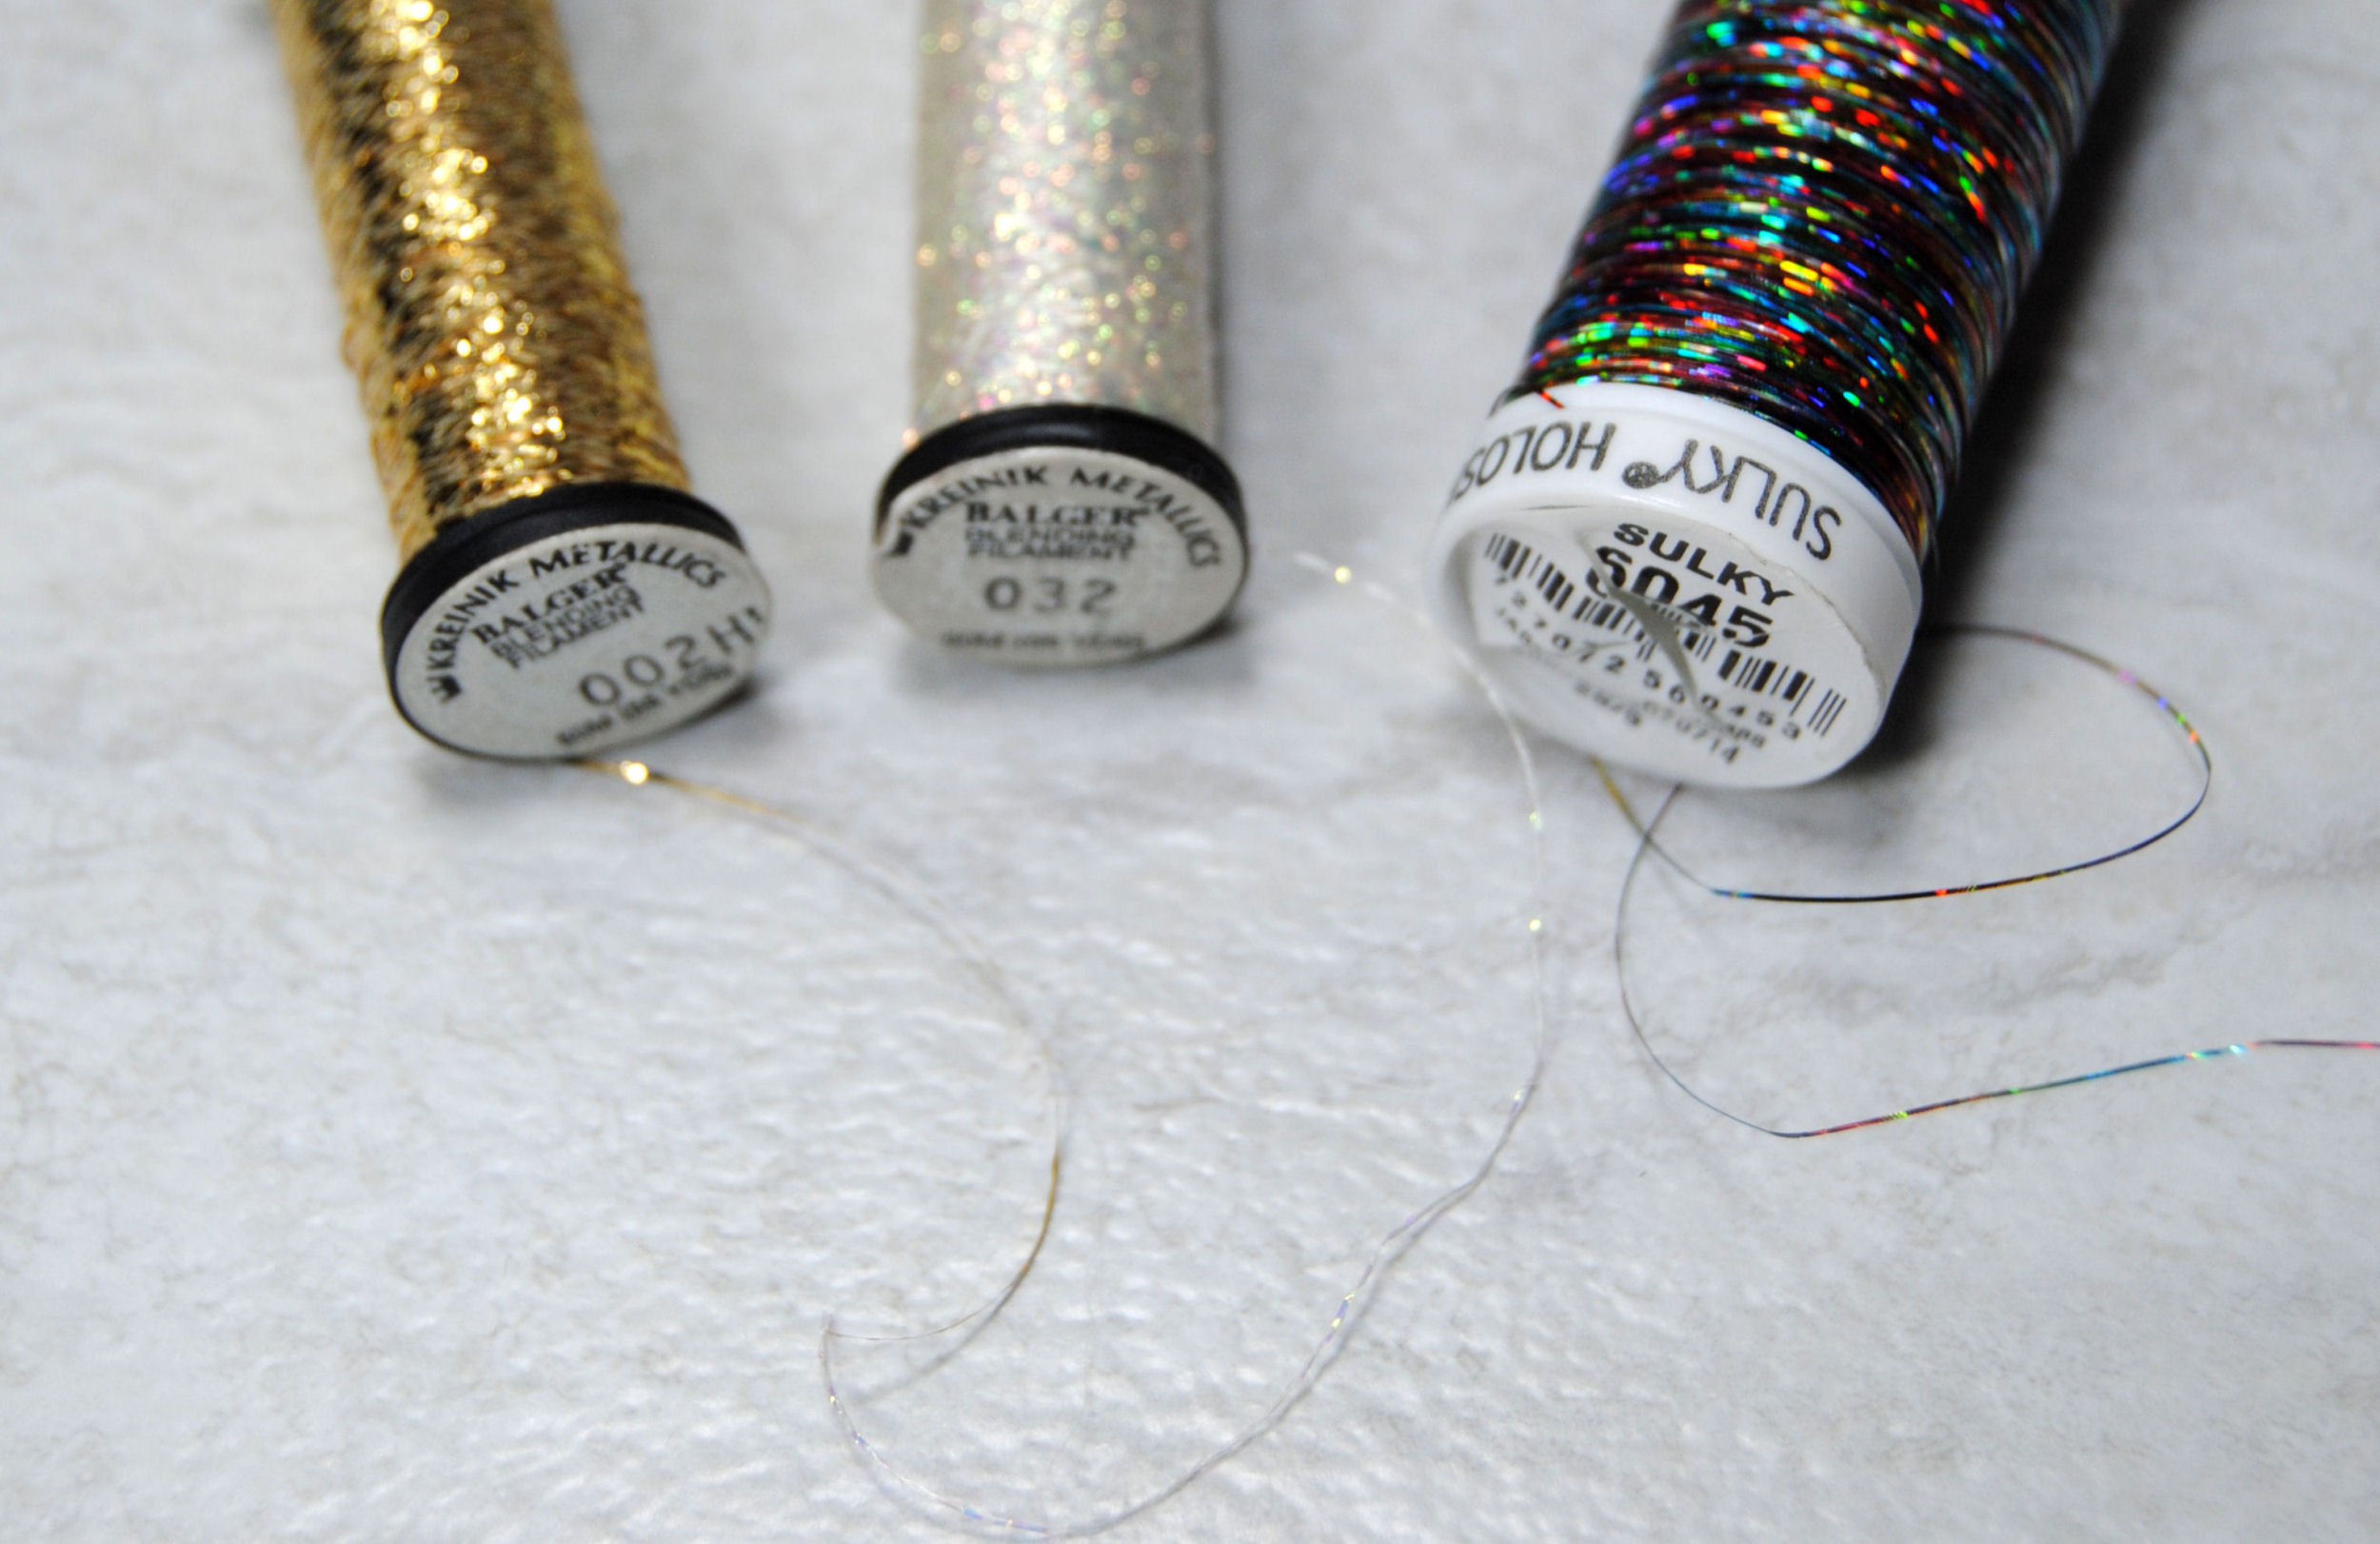 Metallic Embroidery Floss, Sparkle Embroidery Floss, Embroidery